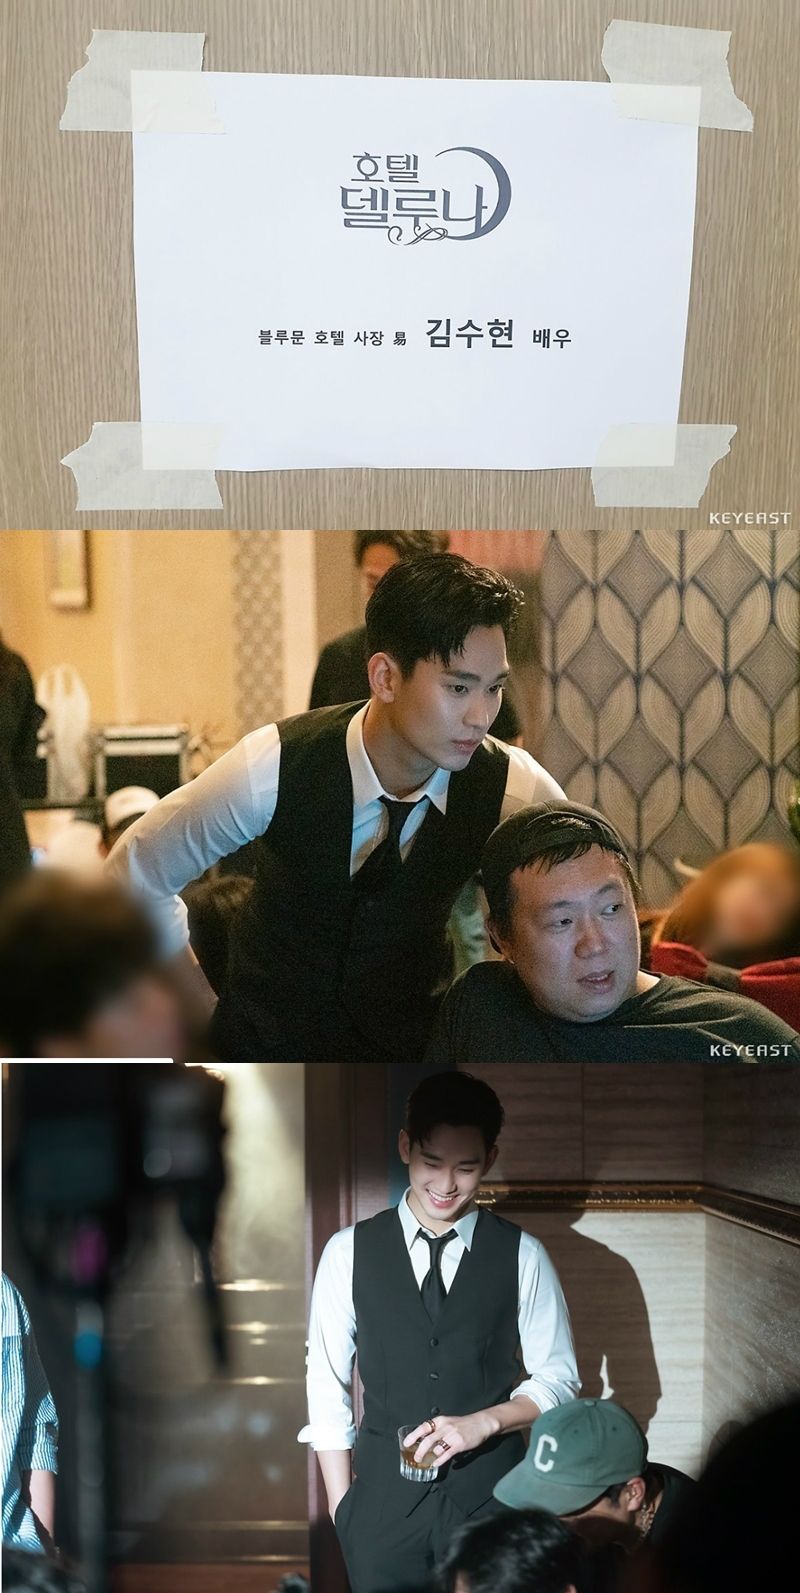 Kim Soo-hyuns agency Keith posted a photo of Kim Soo-hyuns Hotel Deluna shooting scene on Naver Post on the 12th.Kim Soo-hyun, who was released on the day, is wearing a best suit and a tie, and he is also monitored with director Oh Chung-hwan.Kim Soo-hyun is the back door of the director Oh Chung-hwan of Hotel Deluna and Actor IU (Lee Ji-eun) - Yeo Jin-goo, who had a relationship with both, so decided to make a special appearance.Oh worked with Drama Youre From the Stars, and IU worked on Drama Dream High 1 and Producers.Yeo Jin-goo met with Yihwon Station Adult - Child in Drama The Year of the Sun.Kim Soo-hyun appeared as the president of the new Hotel Hotel Blue Moon at the final meeting of Hotel Deluna on the 1st.Kim Soo-hyun finished eighth in the Drama Contributor Top 10 (week 5 of August 2019), compiled by Good Data Corporation with only one special appearance.At that time, the portal real-time search terms showed high popularity by raising words such as Kim Soo-hyun and Hotel Blue Moon.Kim Soo-hyun is currently reviewing his return after being discharged from the military on July 1.